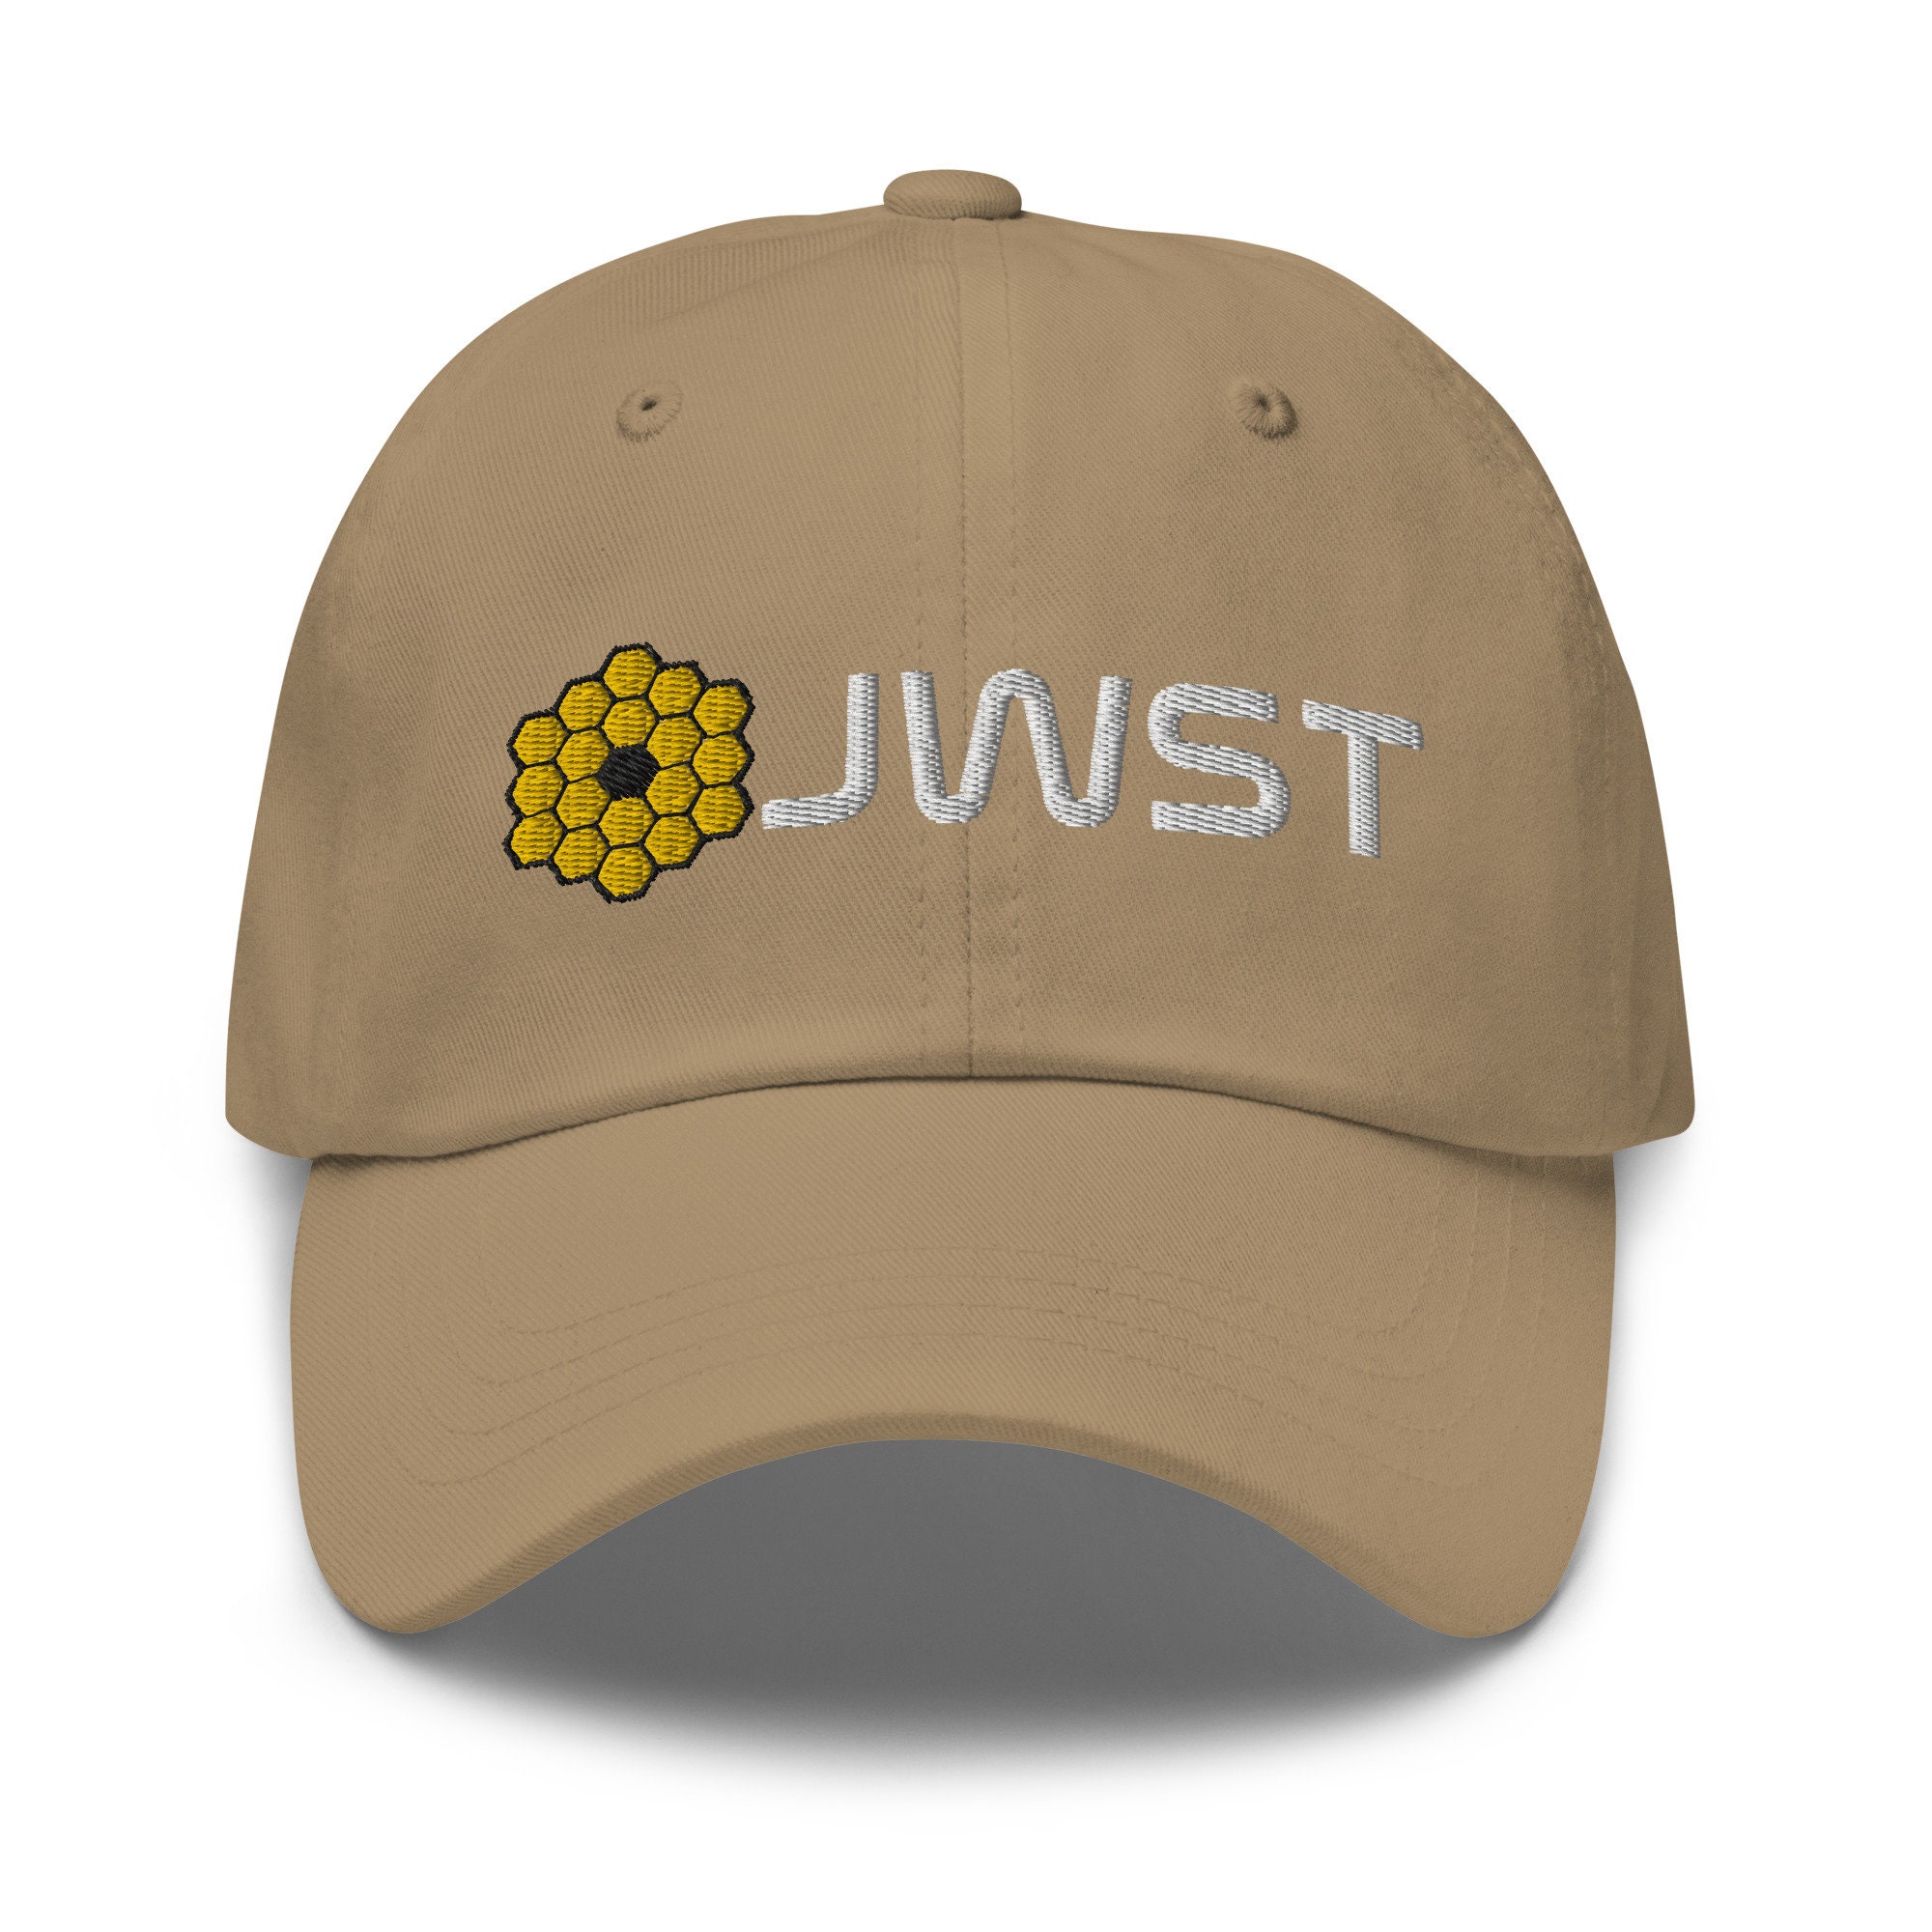 James Webb Space Telescope JWST Baseball Cap Father's Day Embroidered Hat